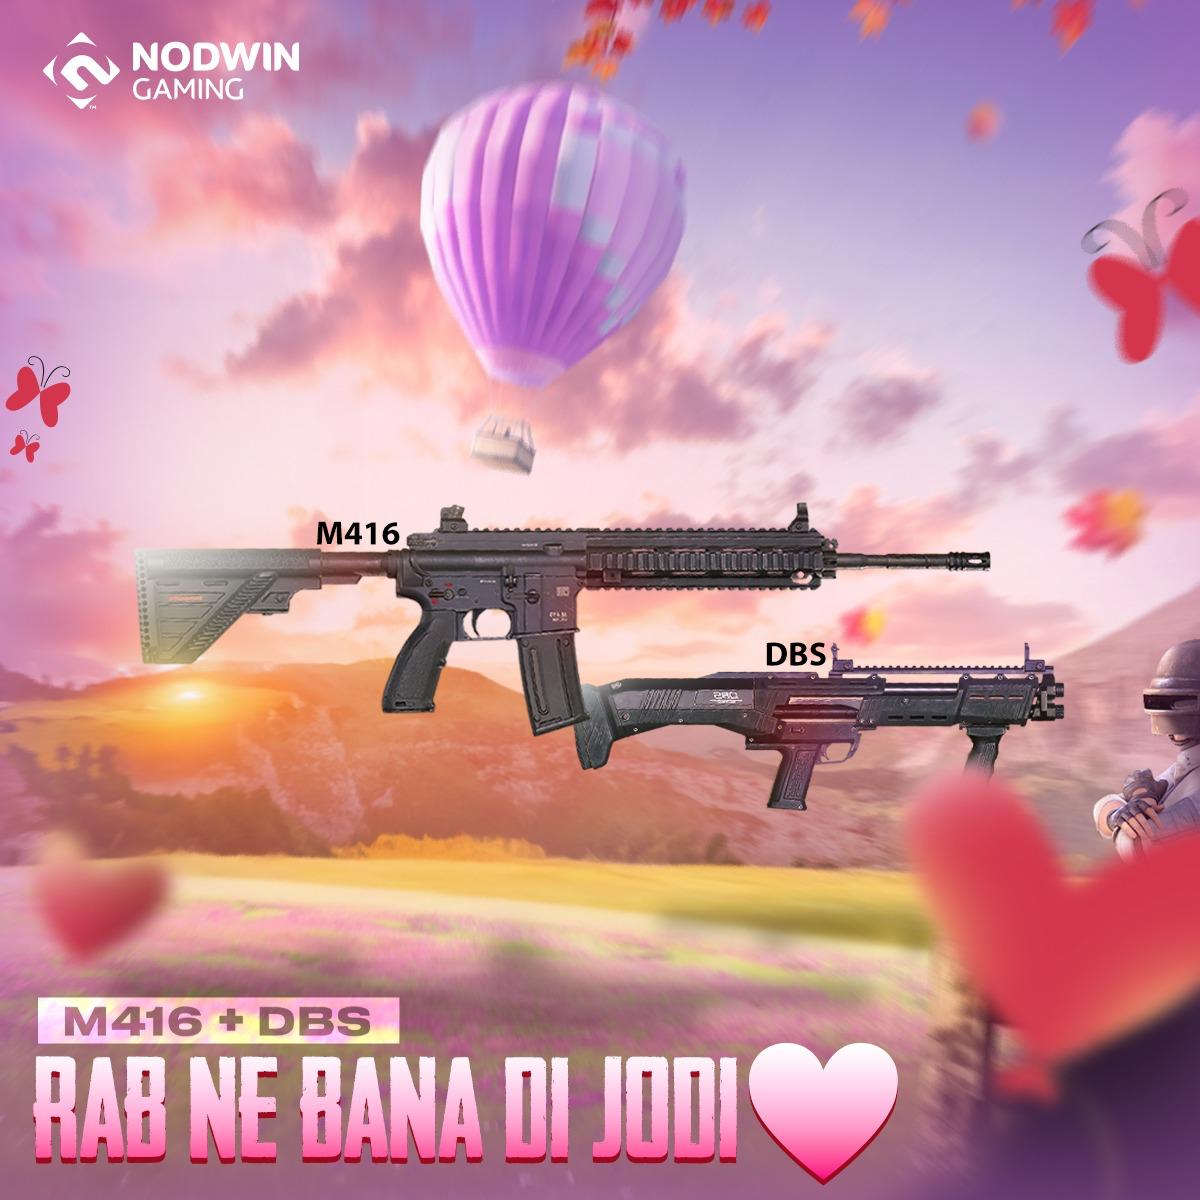 A love story that ensures you’re right on time for the chicken dinner😎🍗🪂🔥
.
.
#BGMI #gaming #esports #gamingcommunity #india #gamingmemes #indiangaming #battlegroundsmobileindia #M416 #Dbs #bestcombo #WWCD #chickendinner